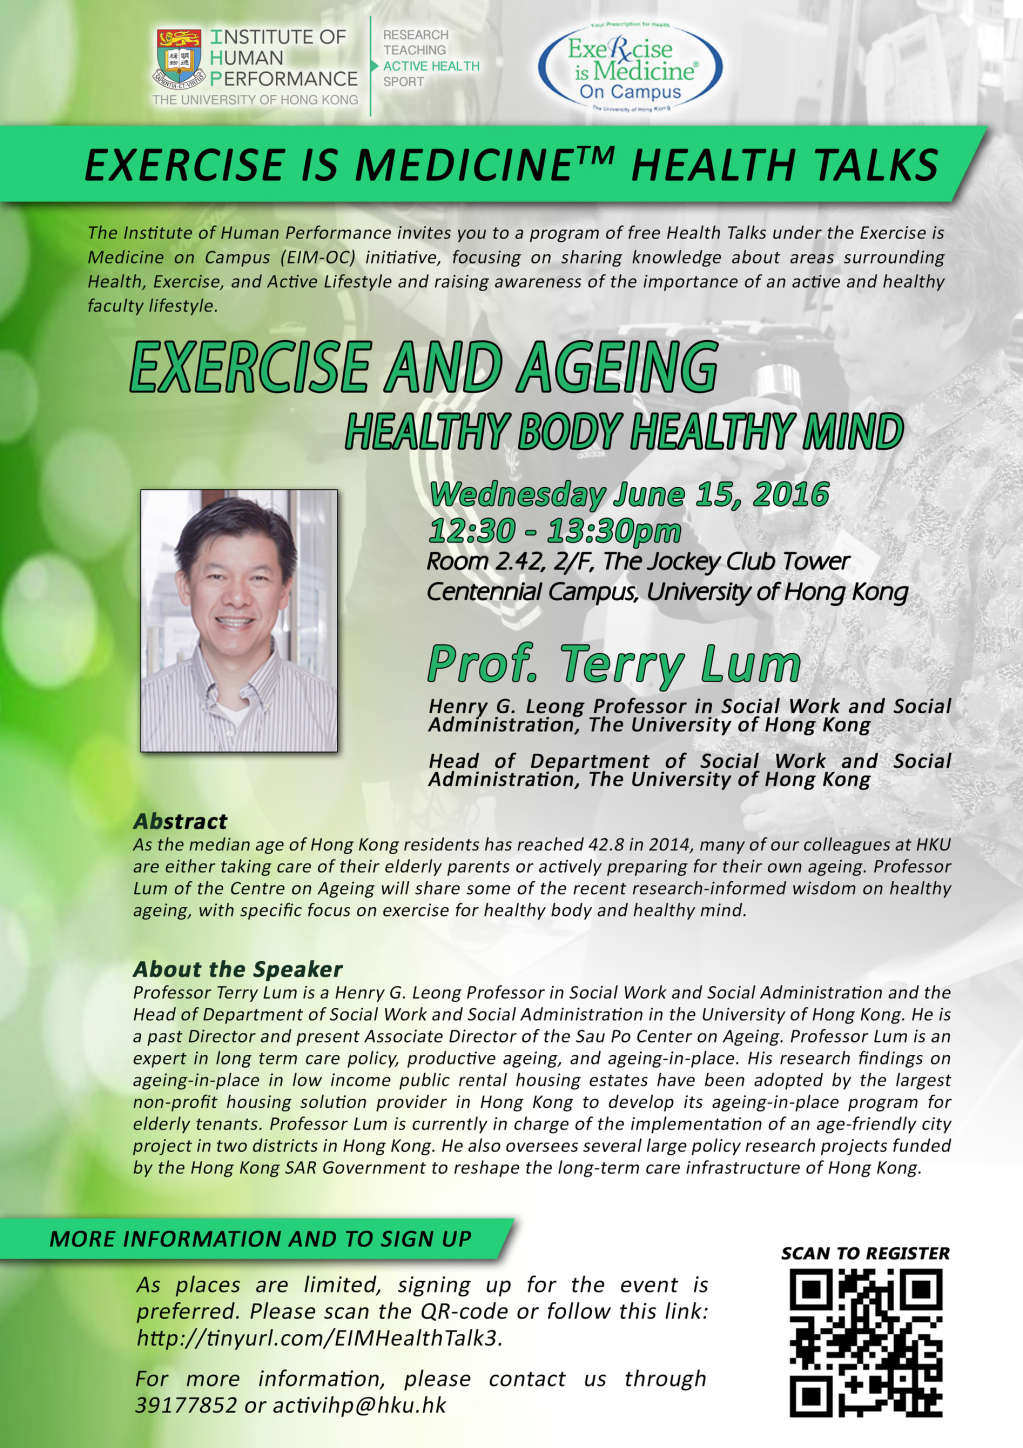 Exercise is Medicine Health Talk - Exercise and Ageing